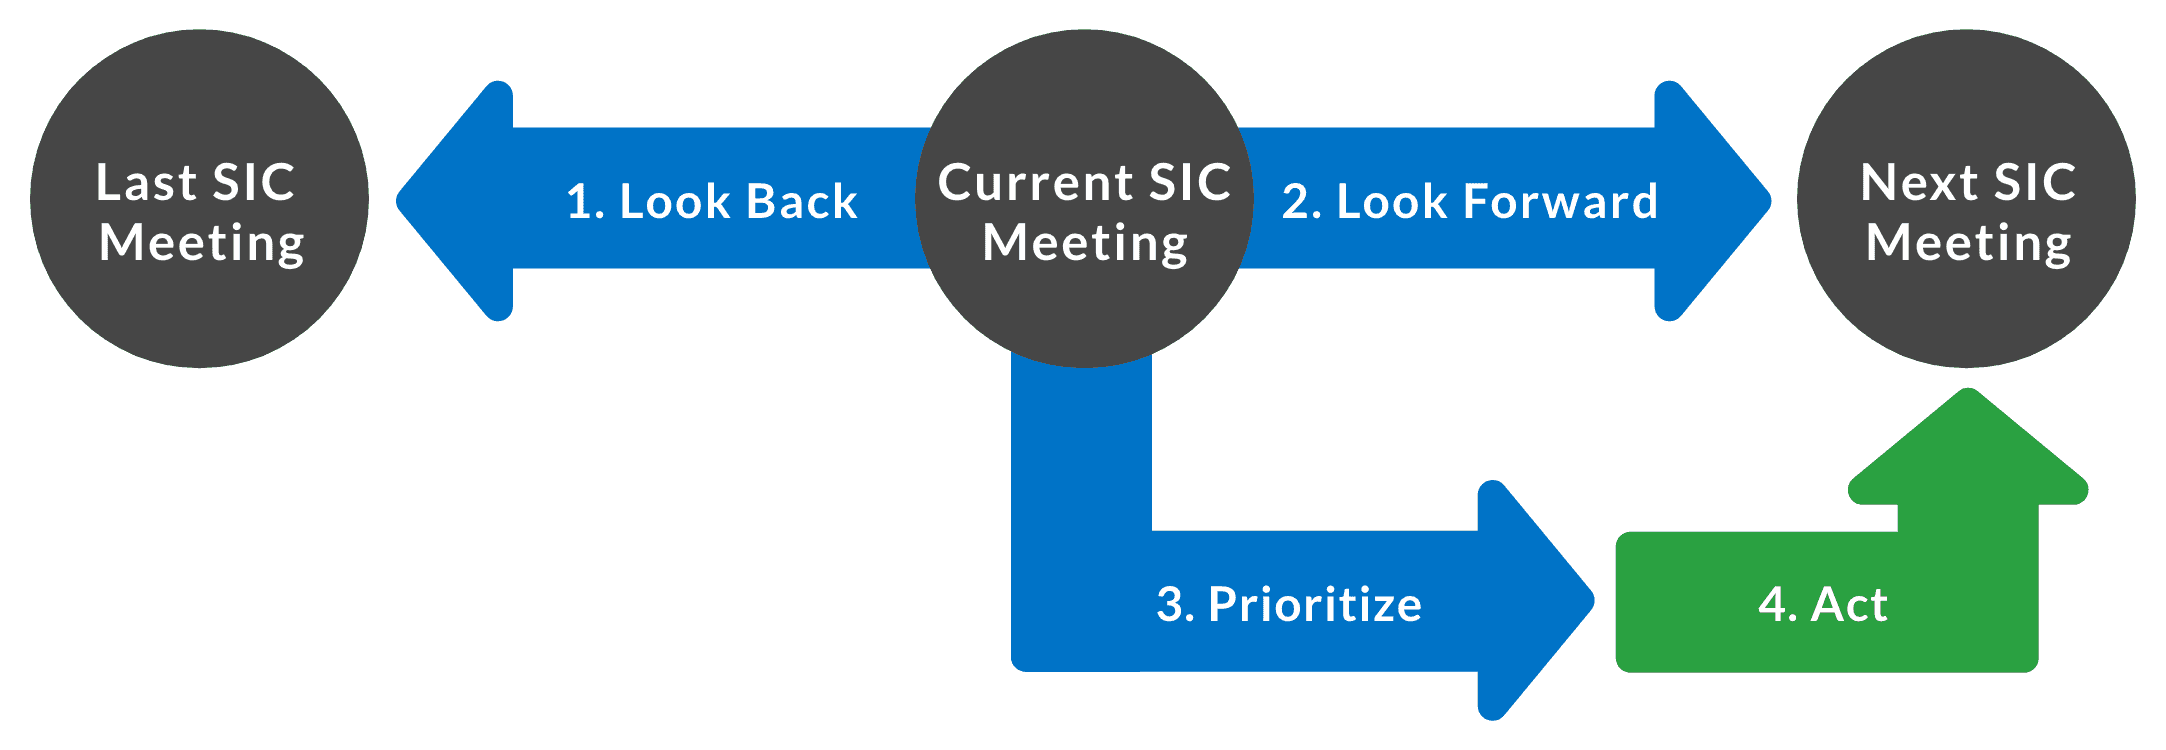 Flowchart showing that during your current SIC meeting, you should look back at your last meeting, look forward to your next meeting, and prioritize and act based on what you learn.